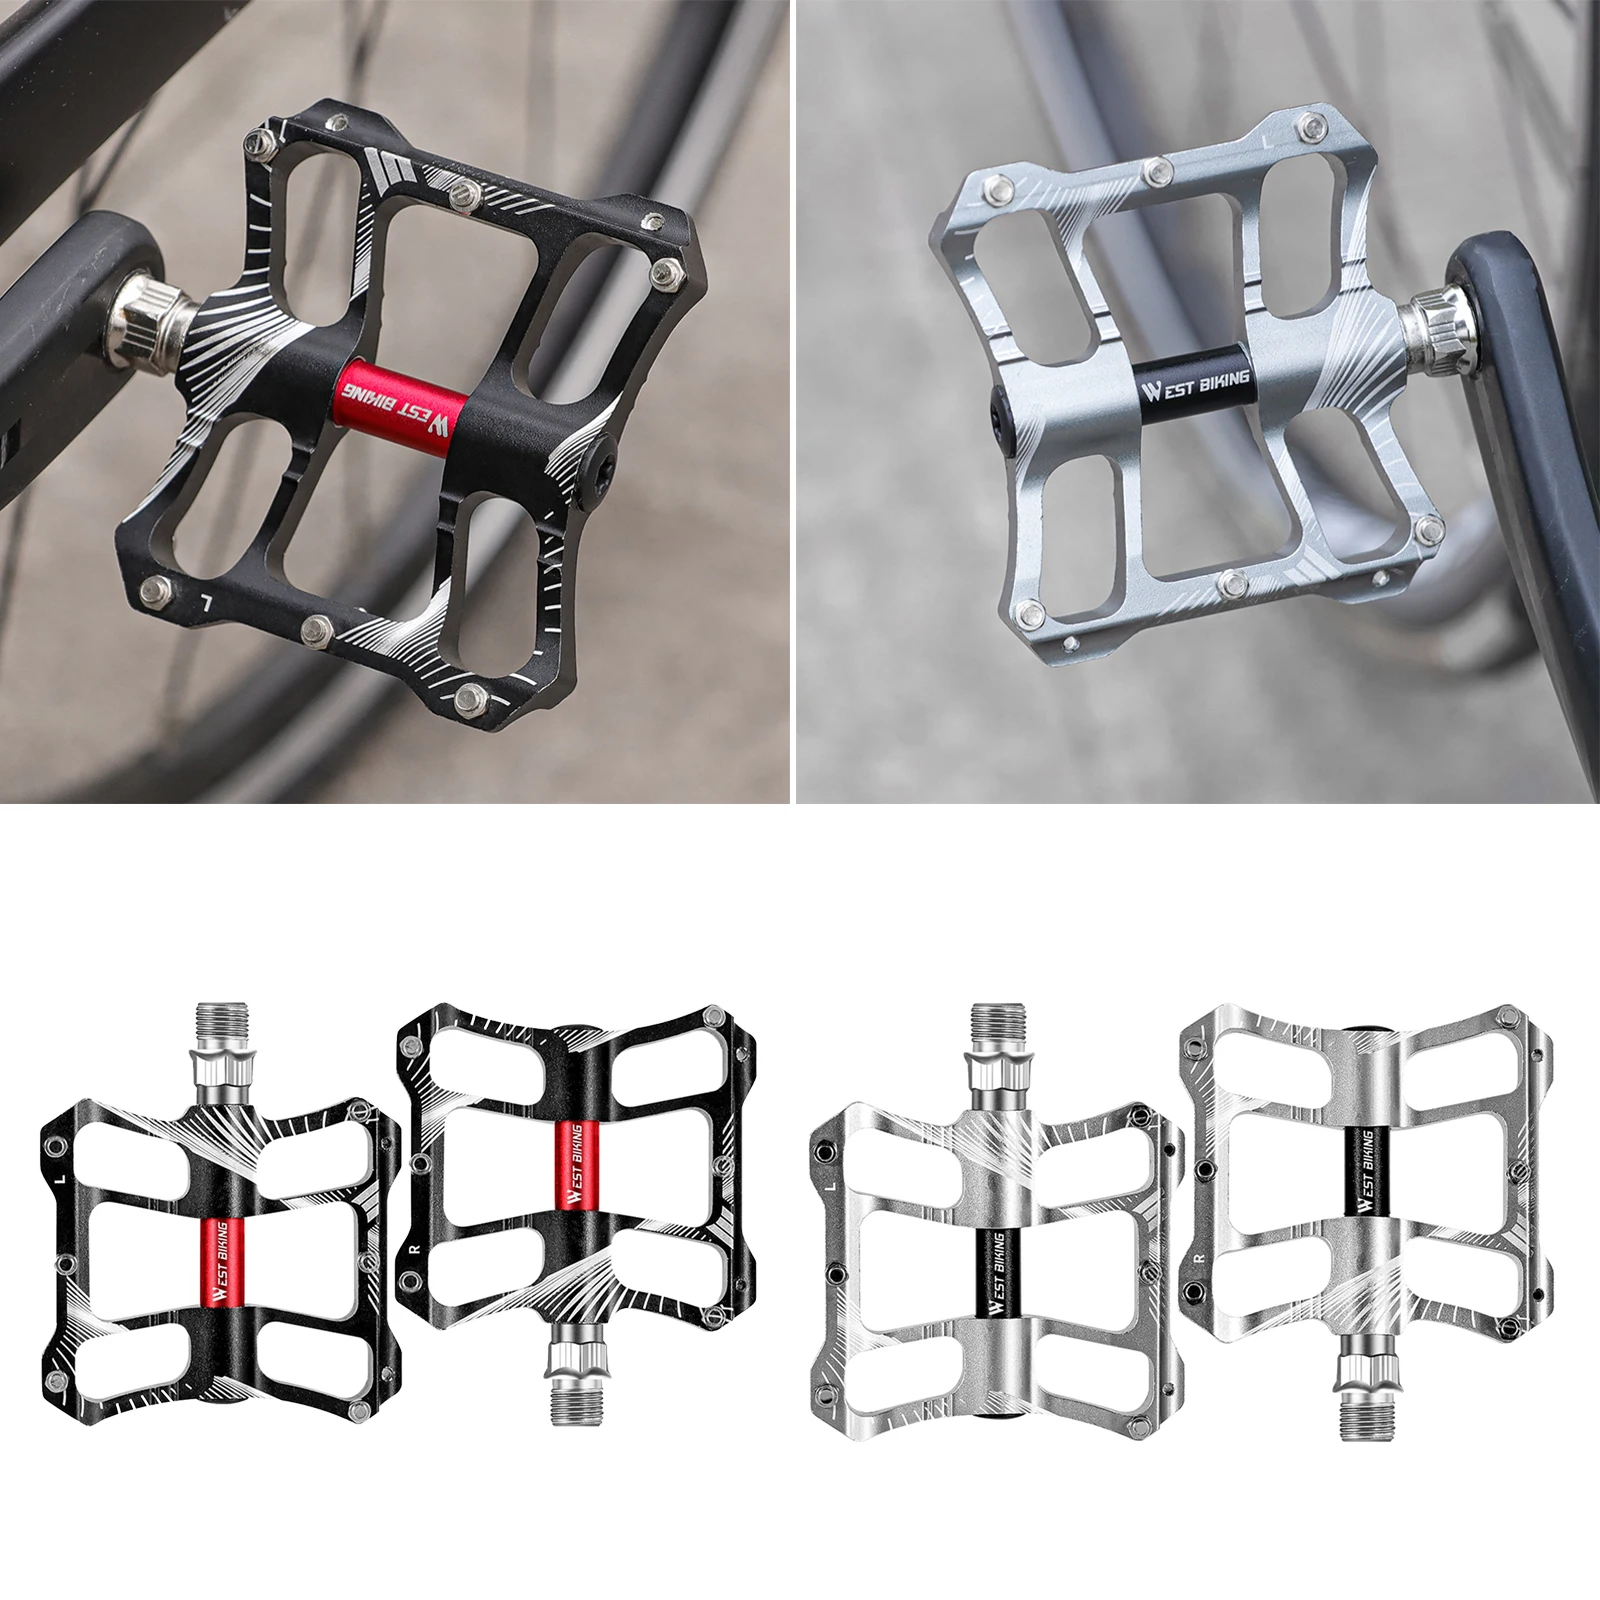 CNC Aluminum Alloy Anti-Slip Flat Bike Pedals 9/16`` Universal Cycle, Abrasion Resistance, Anodized Surface, Reduces Scratches